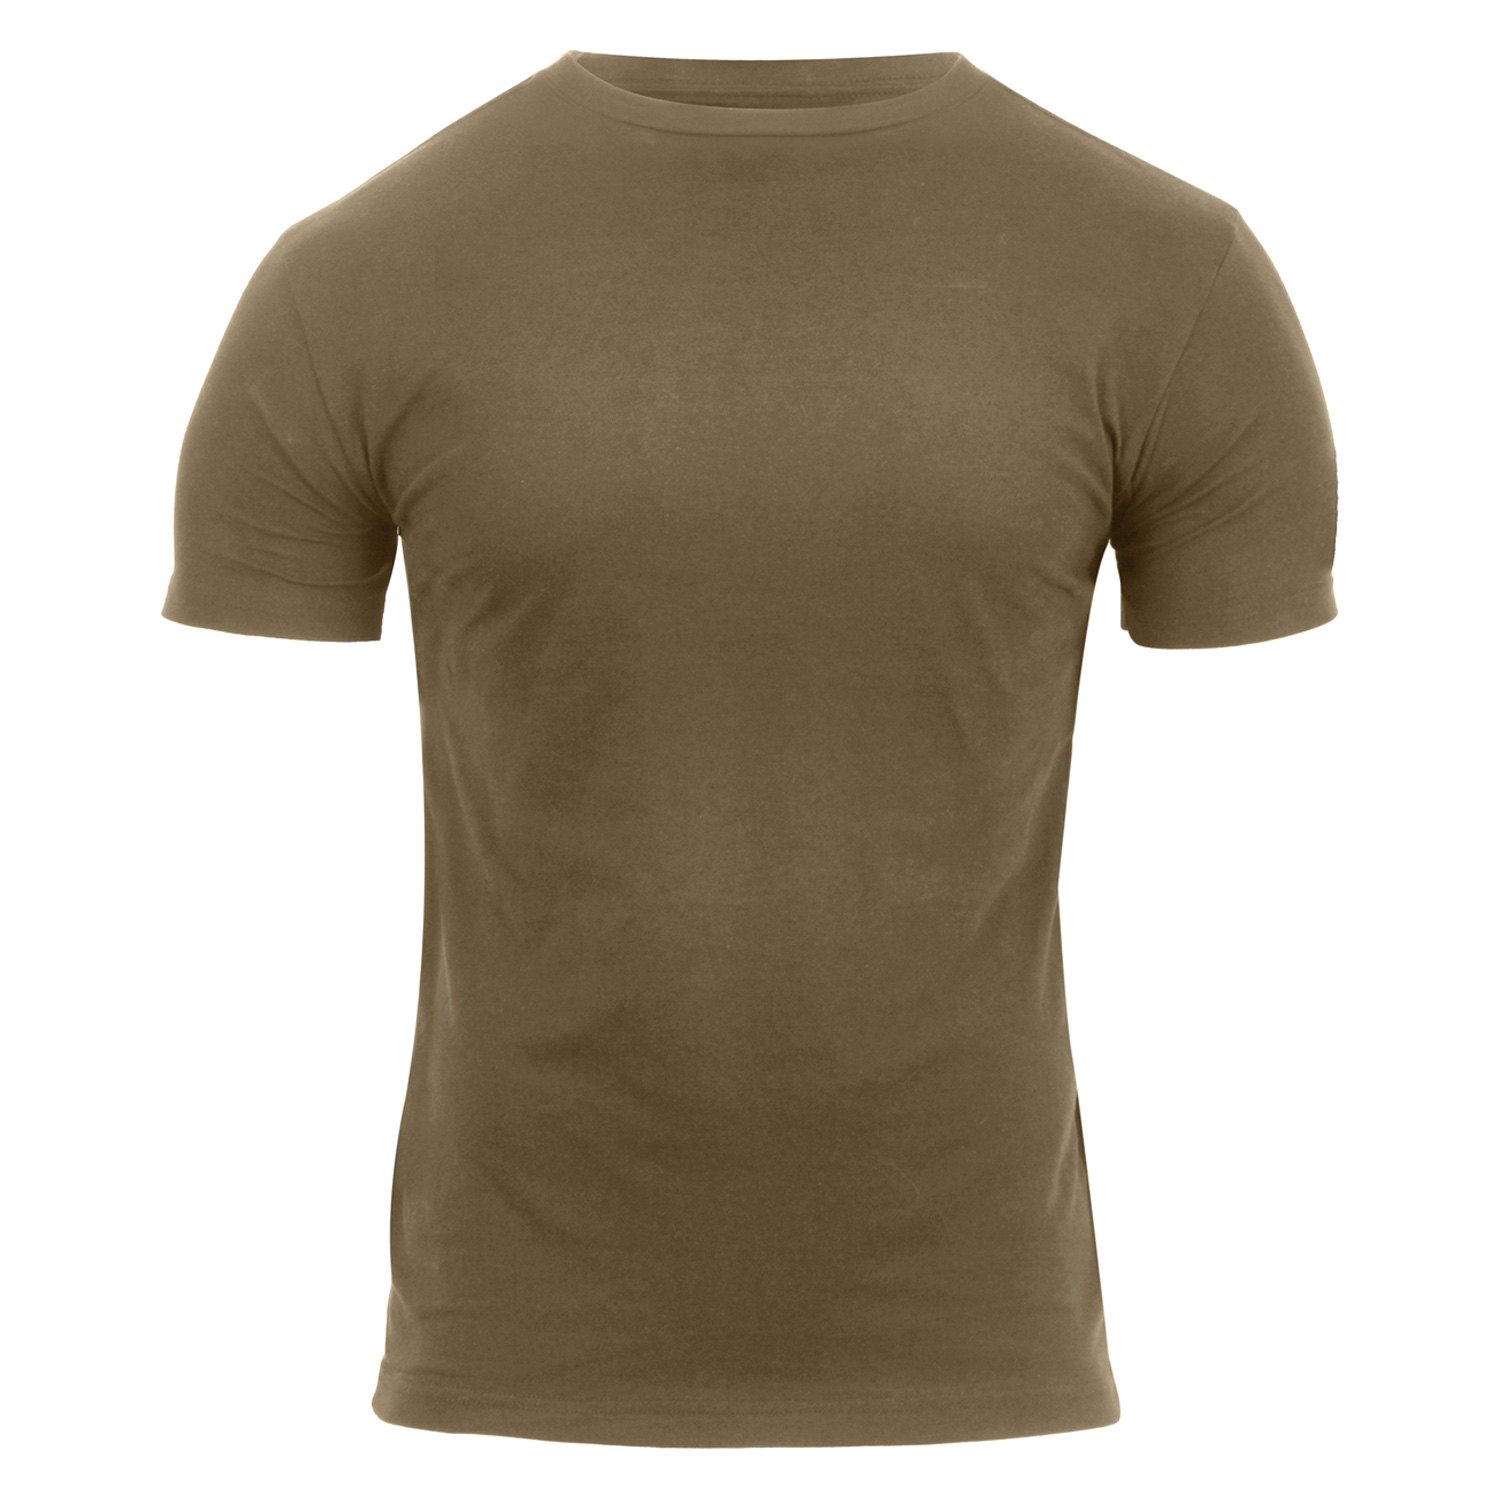 Rothco® 1747-M - Military Men's Medium AR 670-1 Coyote Brown Athletic ...